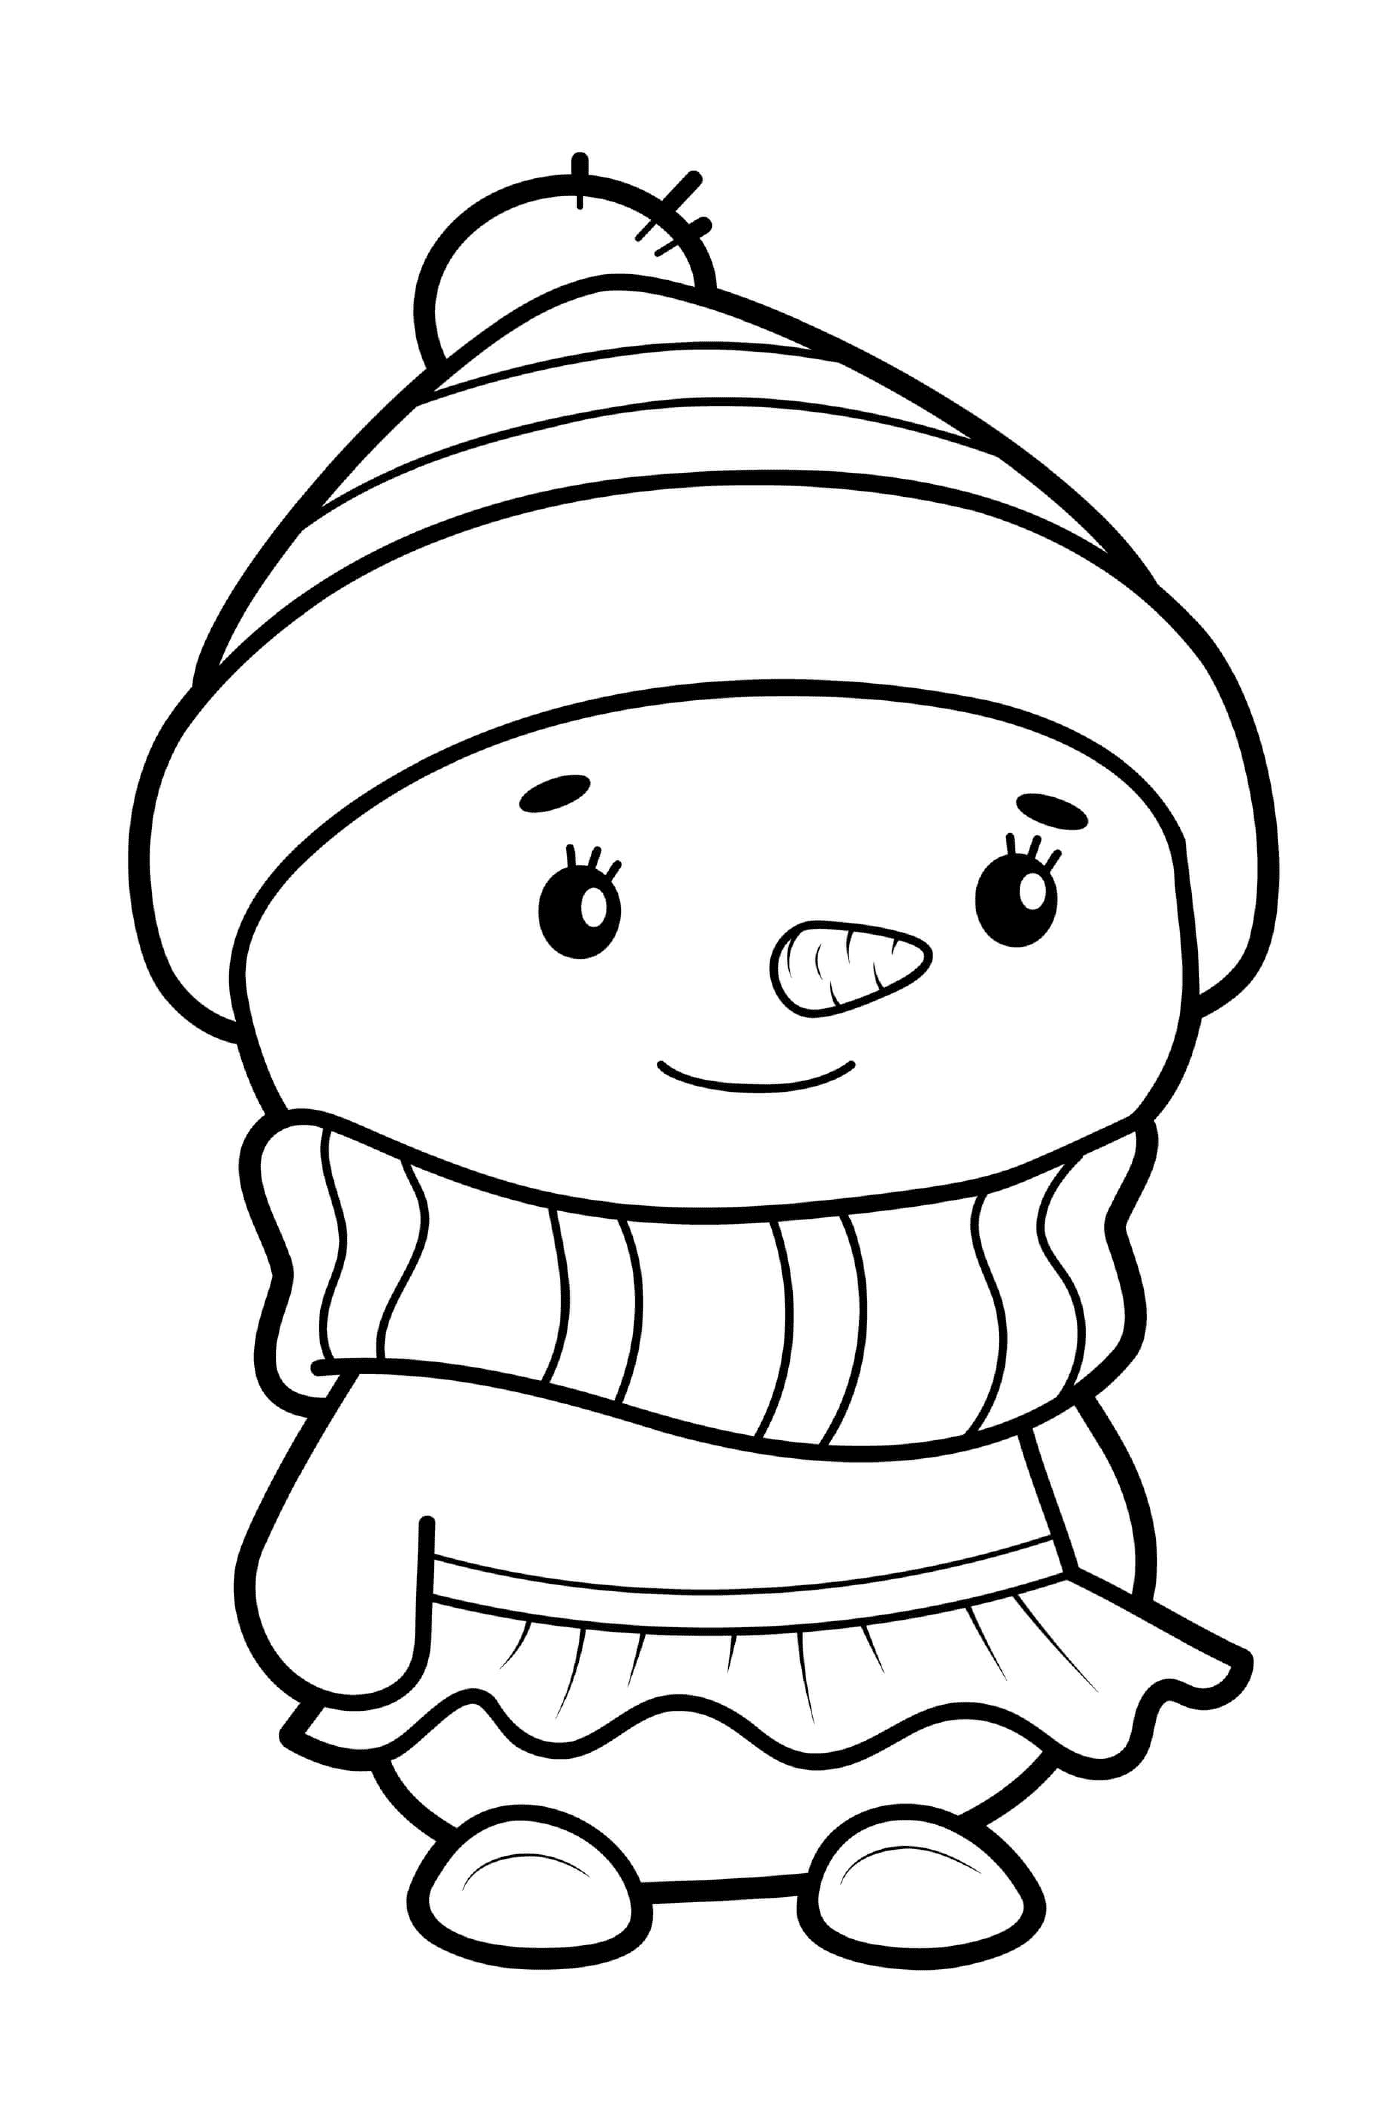  A snowman dressed as a girl with a dress and a hat 